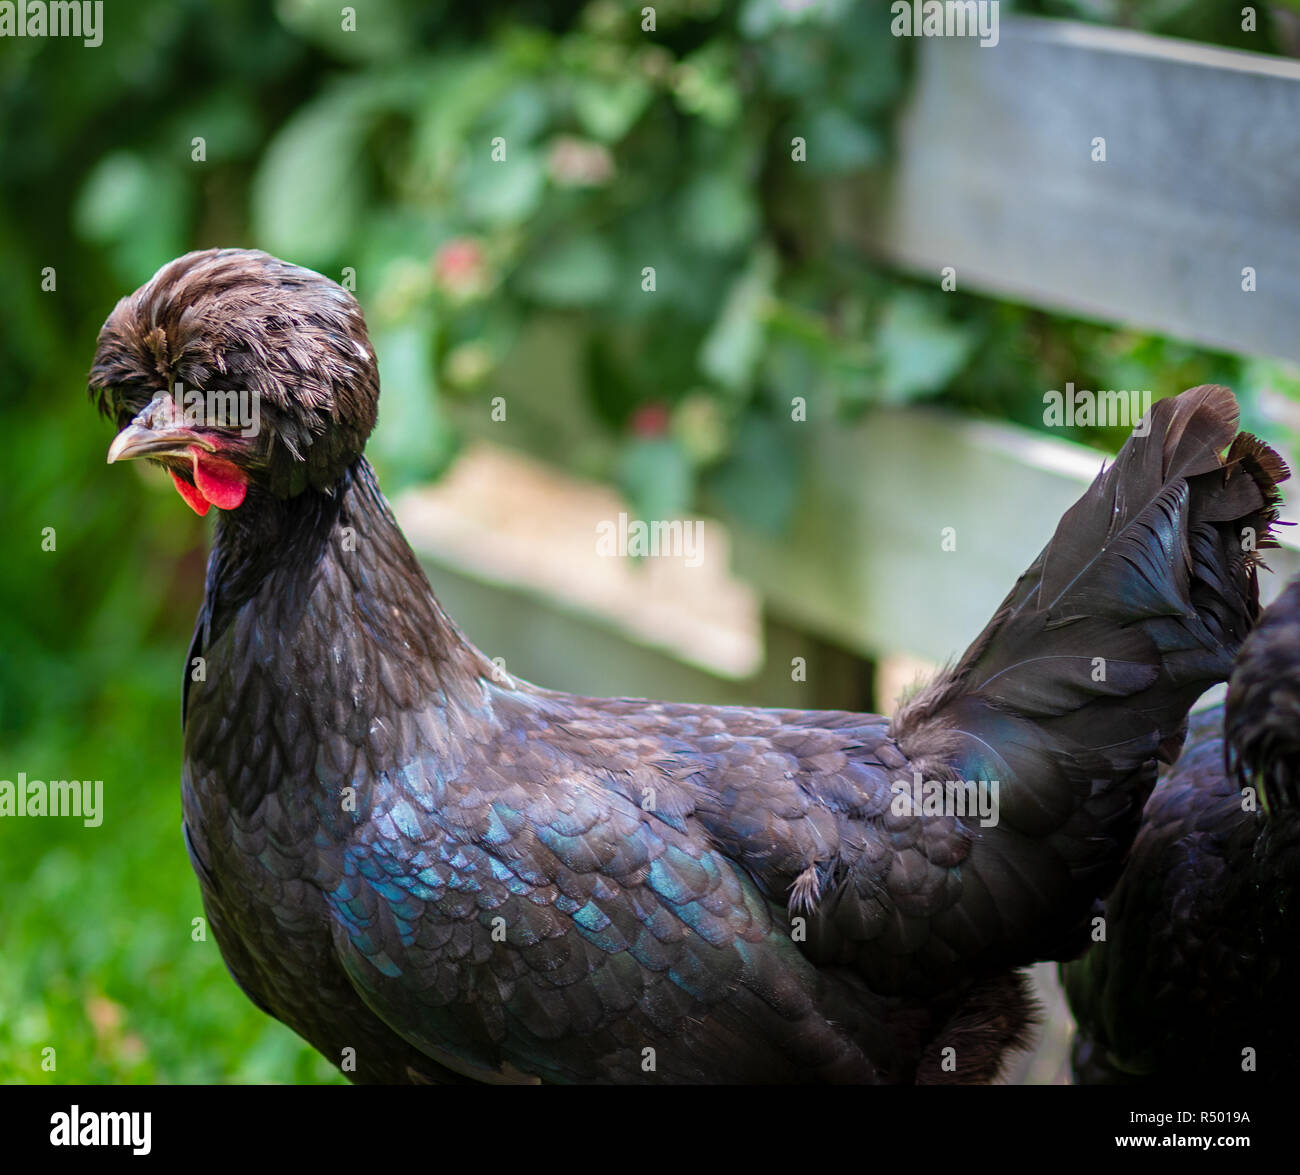 Black chicken, Polish breed bantam hen with characteristic pom pom crested head feathers, a good free range backyard chicken or quirky pet Stock Photo